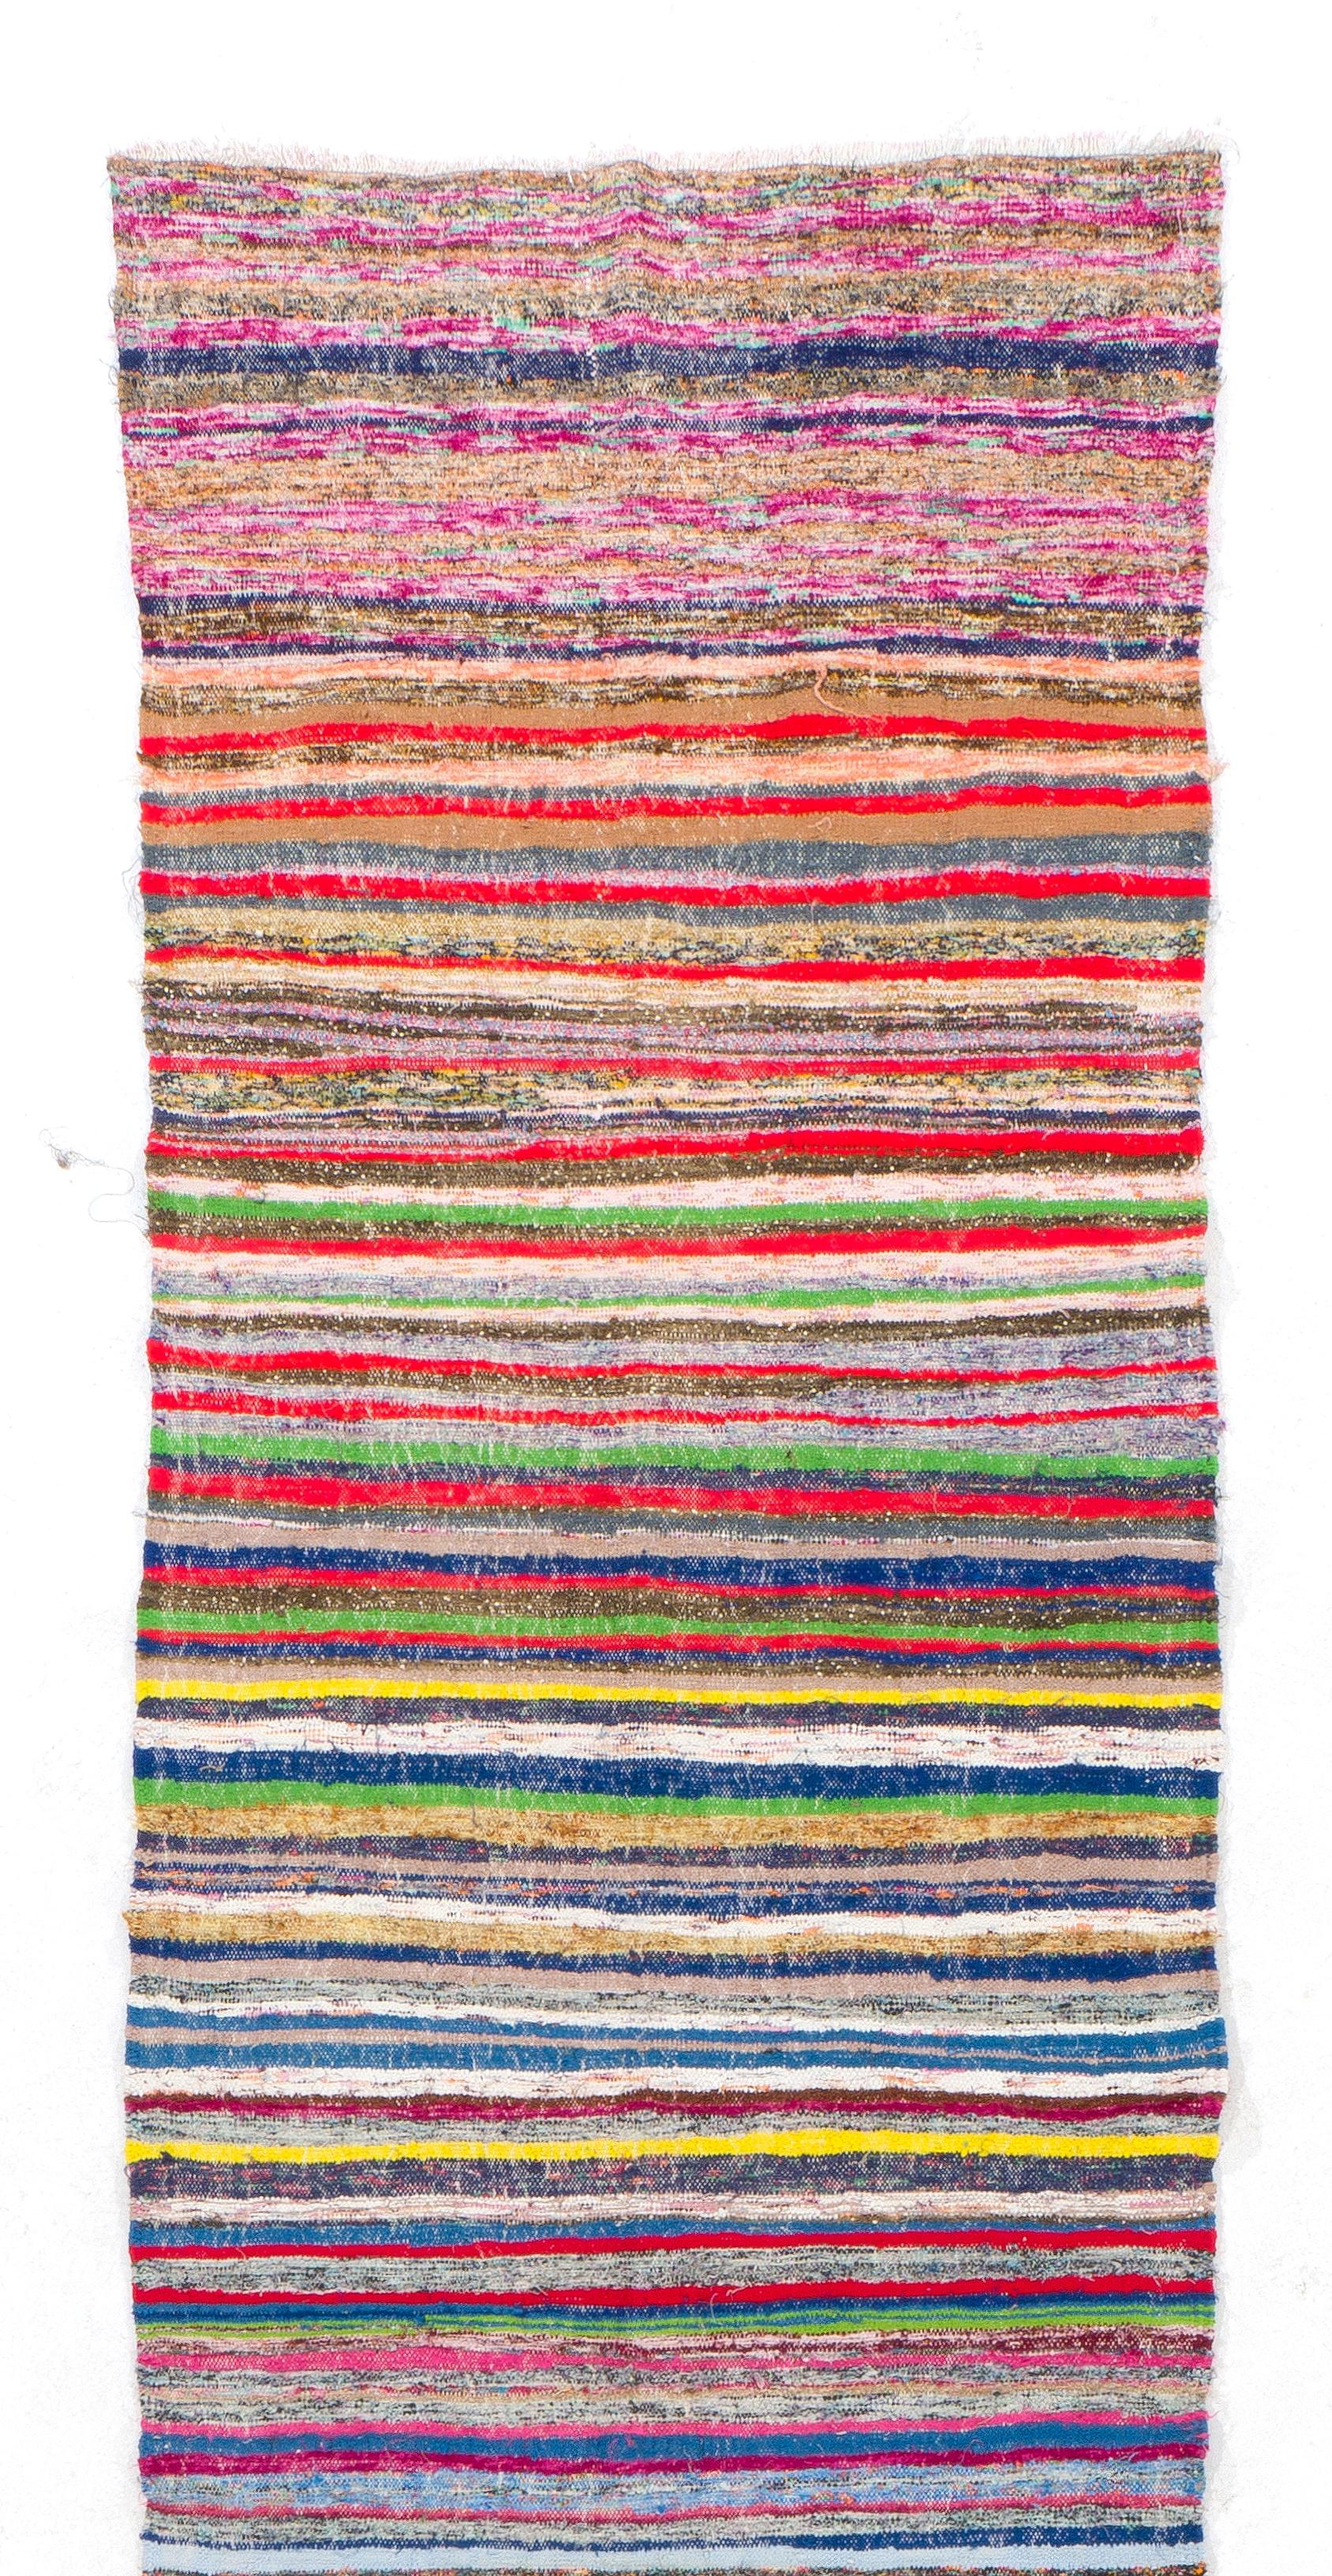 - Size can be altered if requested 
An authentic flat-weave (Kilim) from Eastern Turkey, made of cotton, hand-woven by once nomadic people to be used as floor coverings in their tents and winter homes. It features a simple design of stripes in